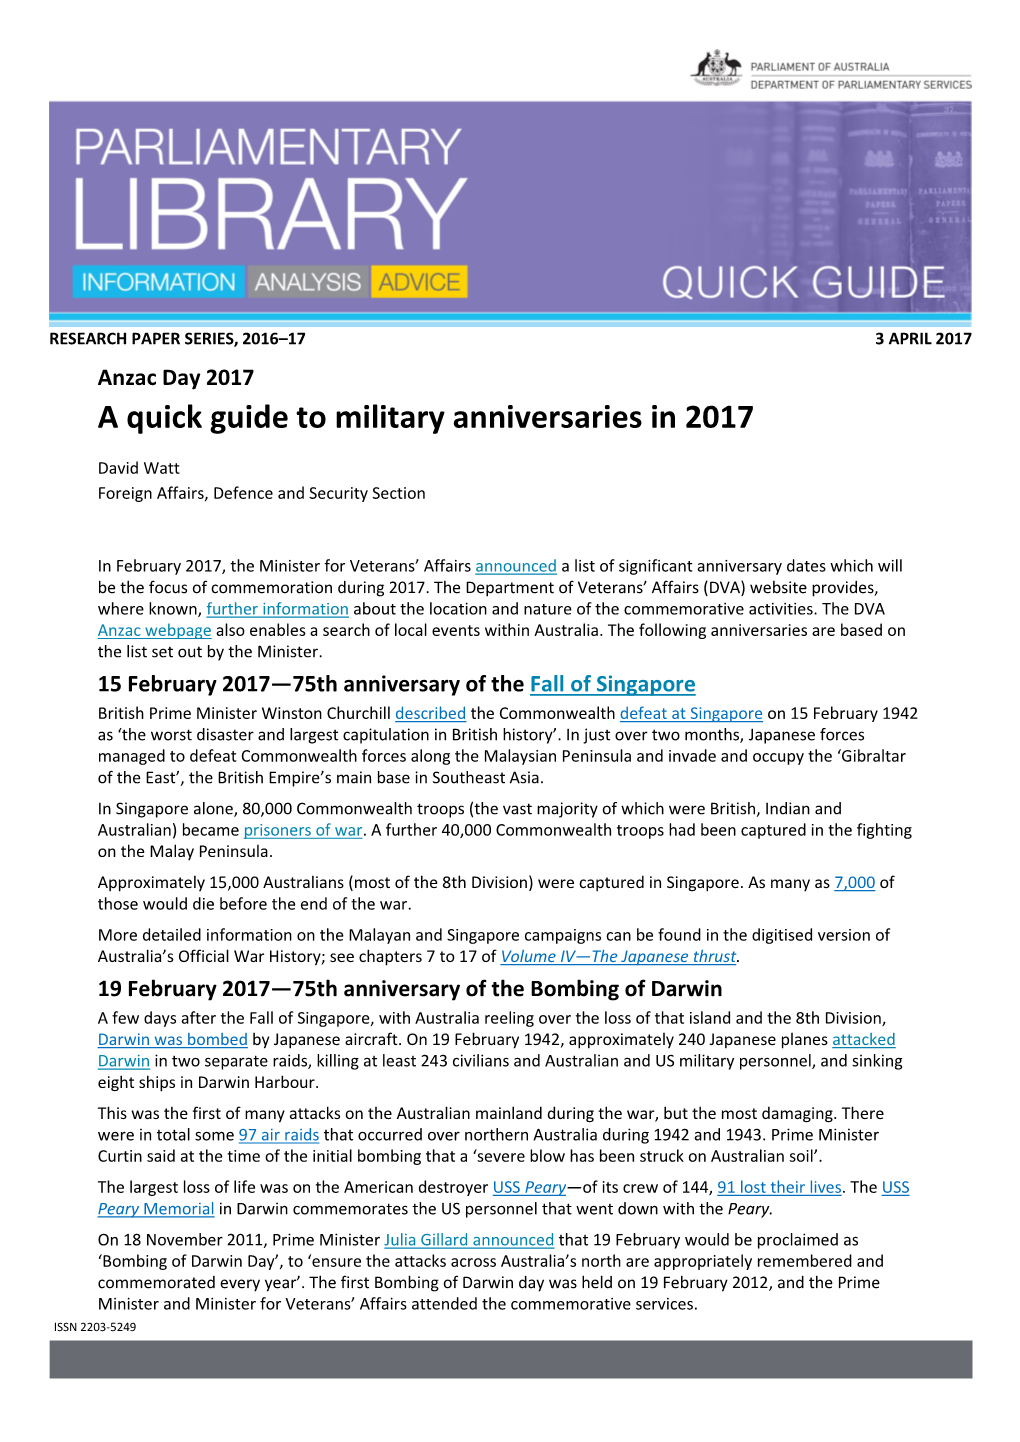 A Quick Guide to Military Anniversaries in 2017